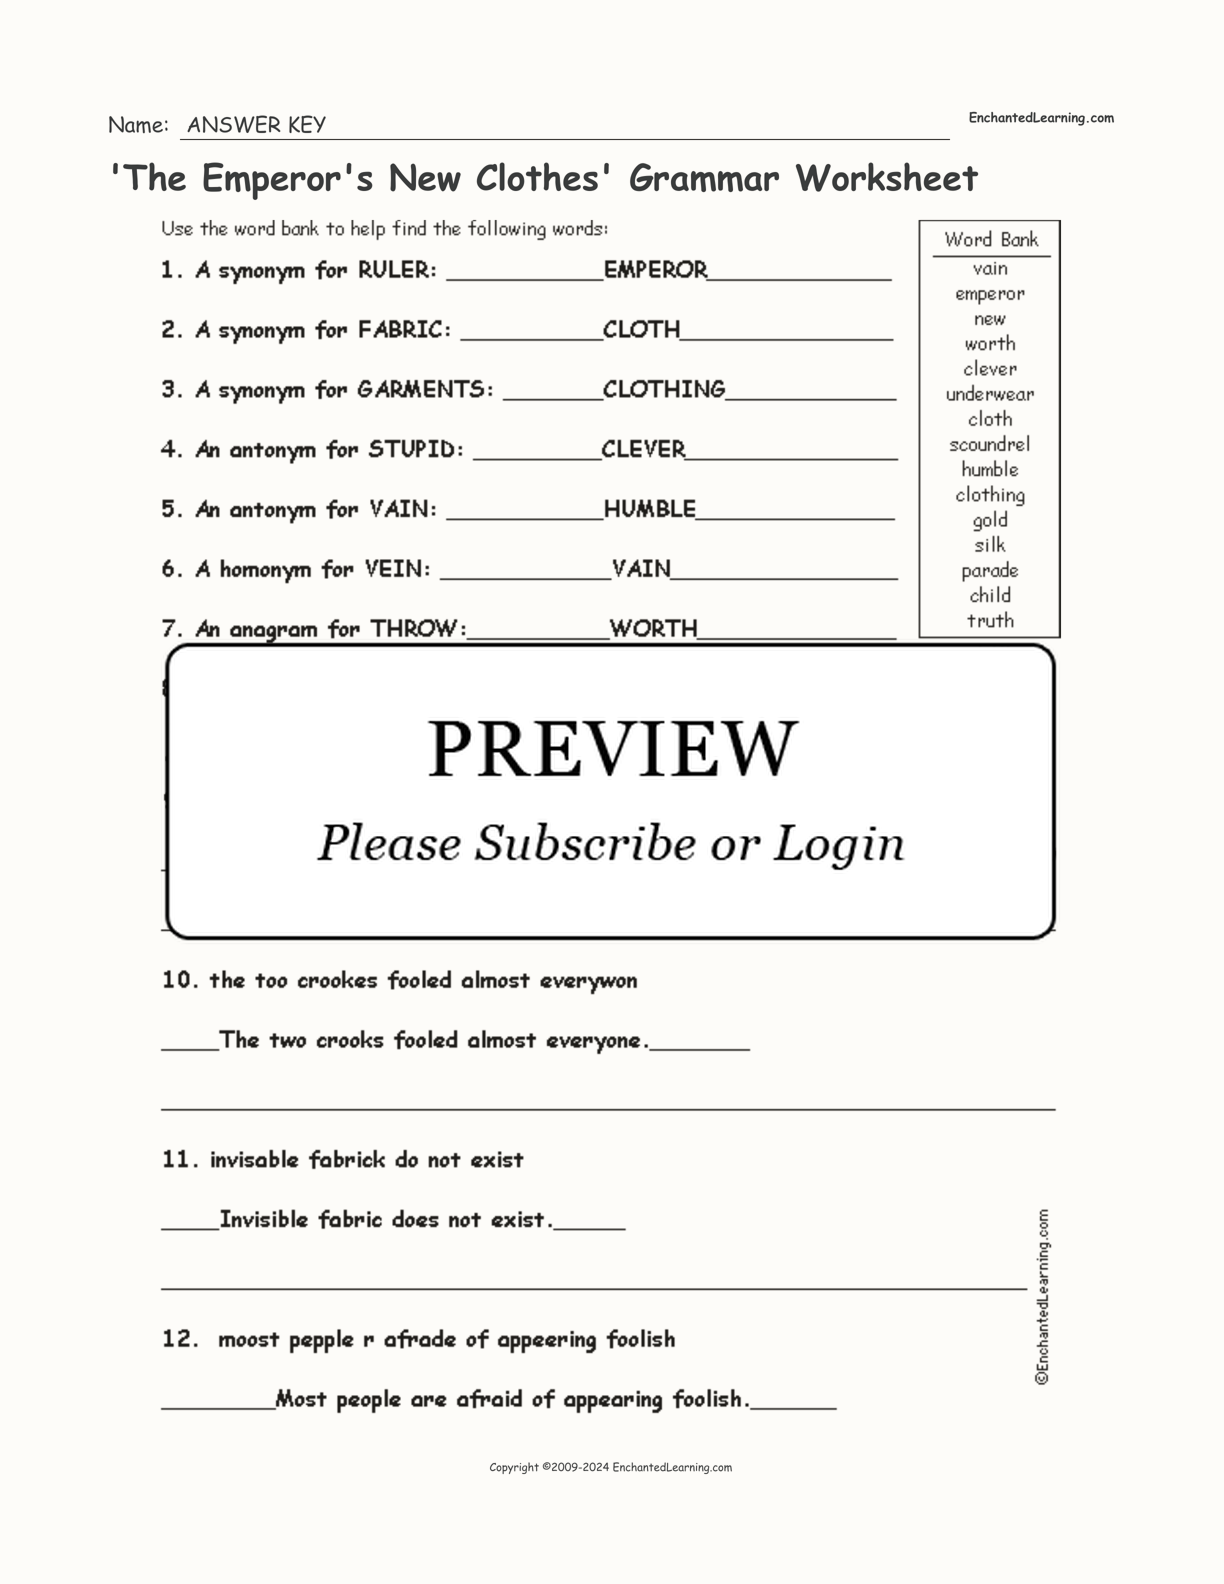 'The Emperor's New Clothes' Grammar Worksheet interactive worksheet page 2